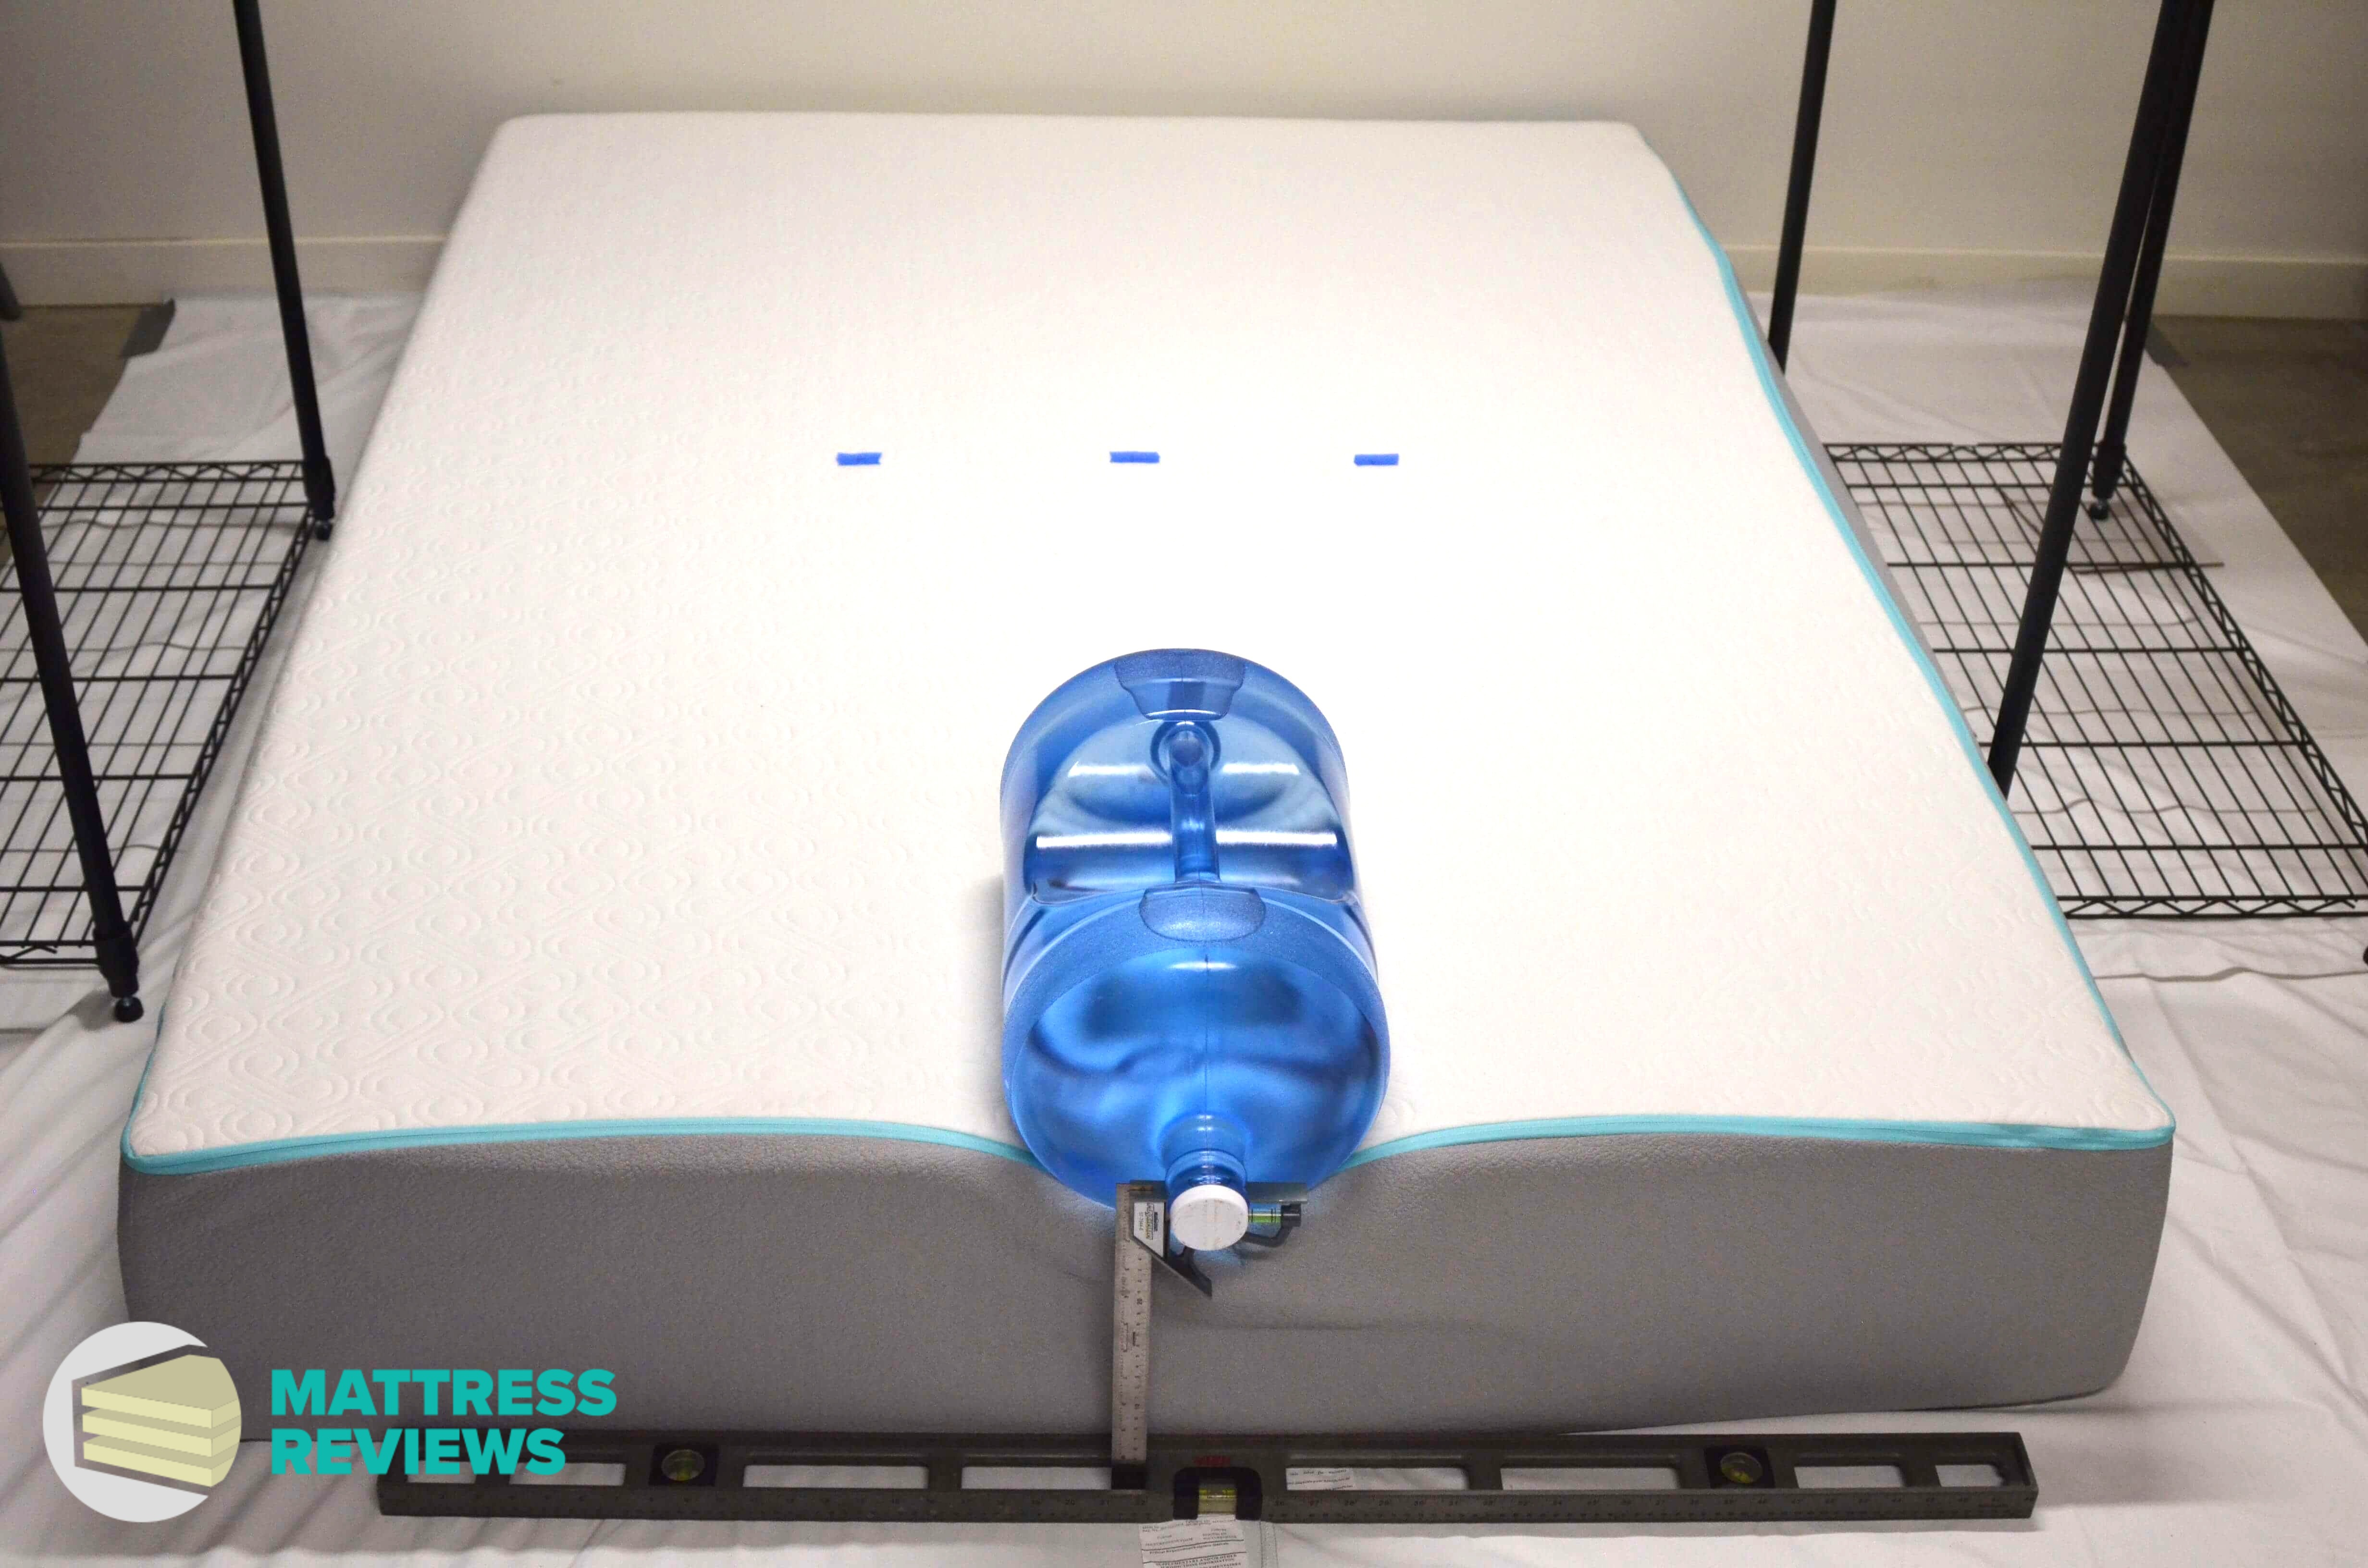 Image of the Bloom mattress edge support test.